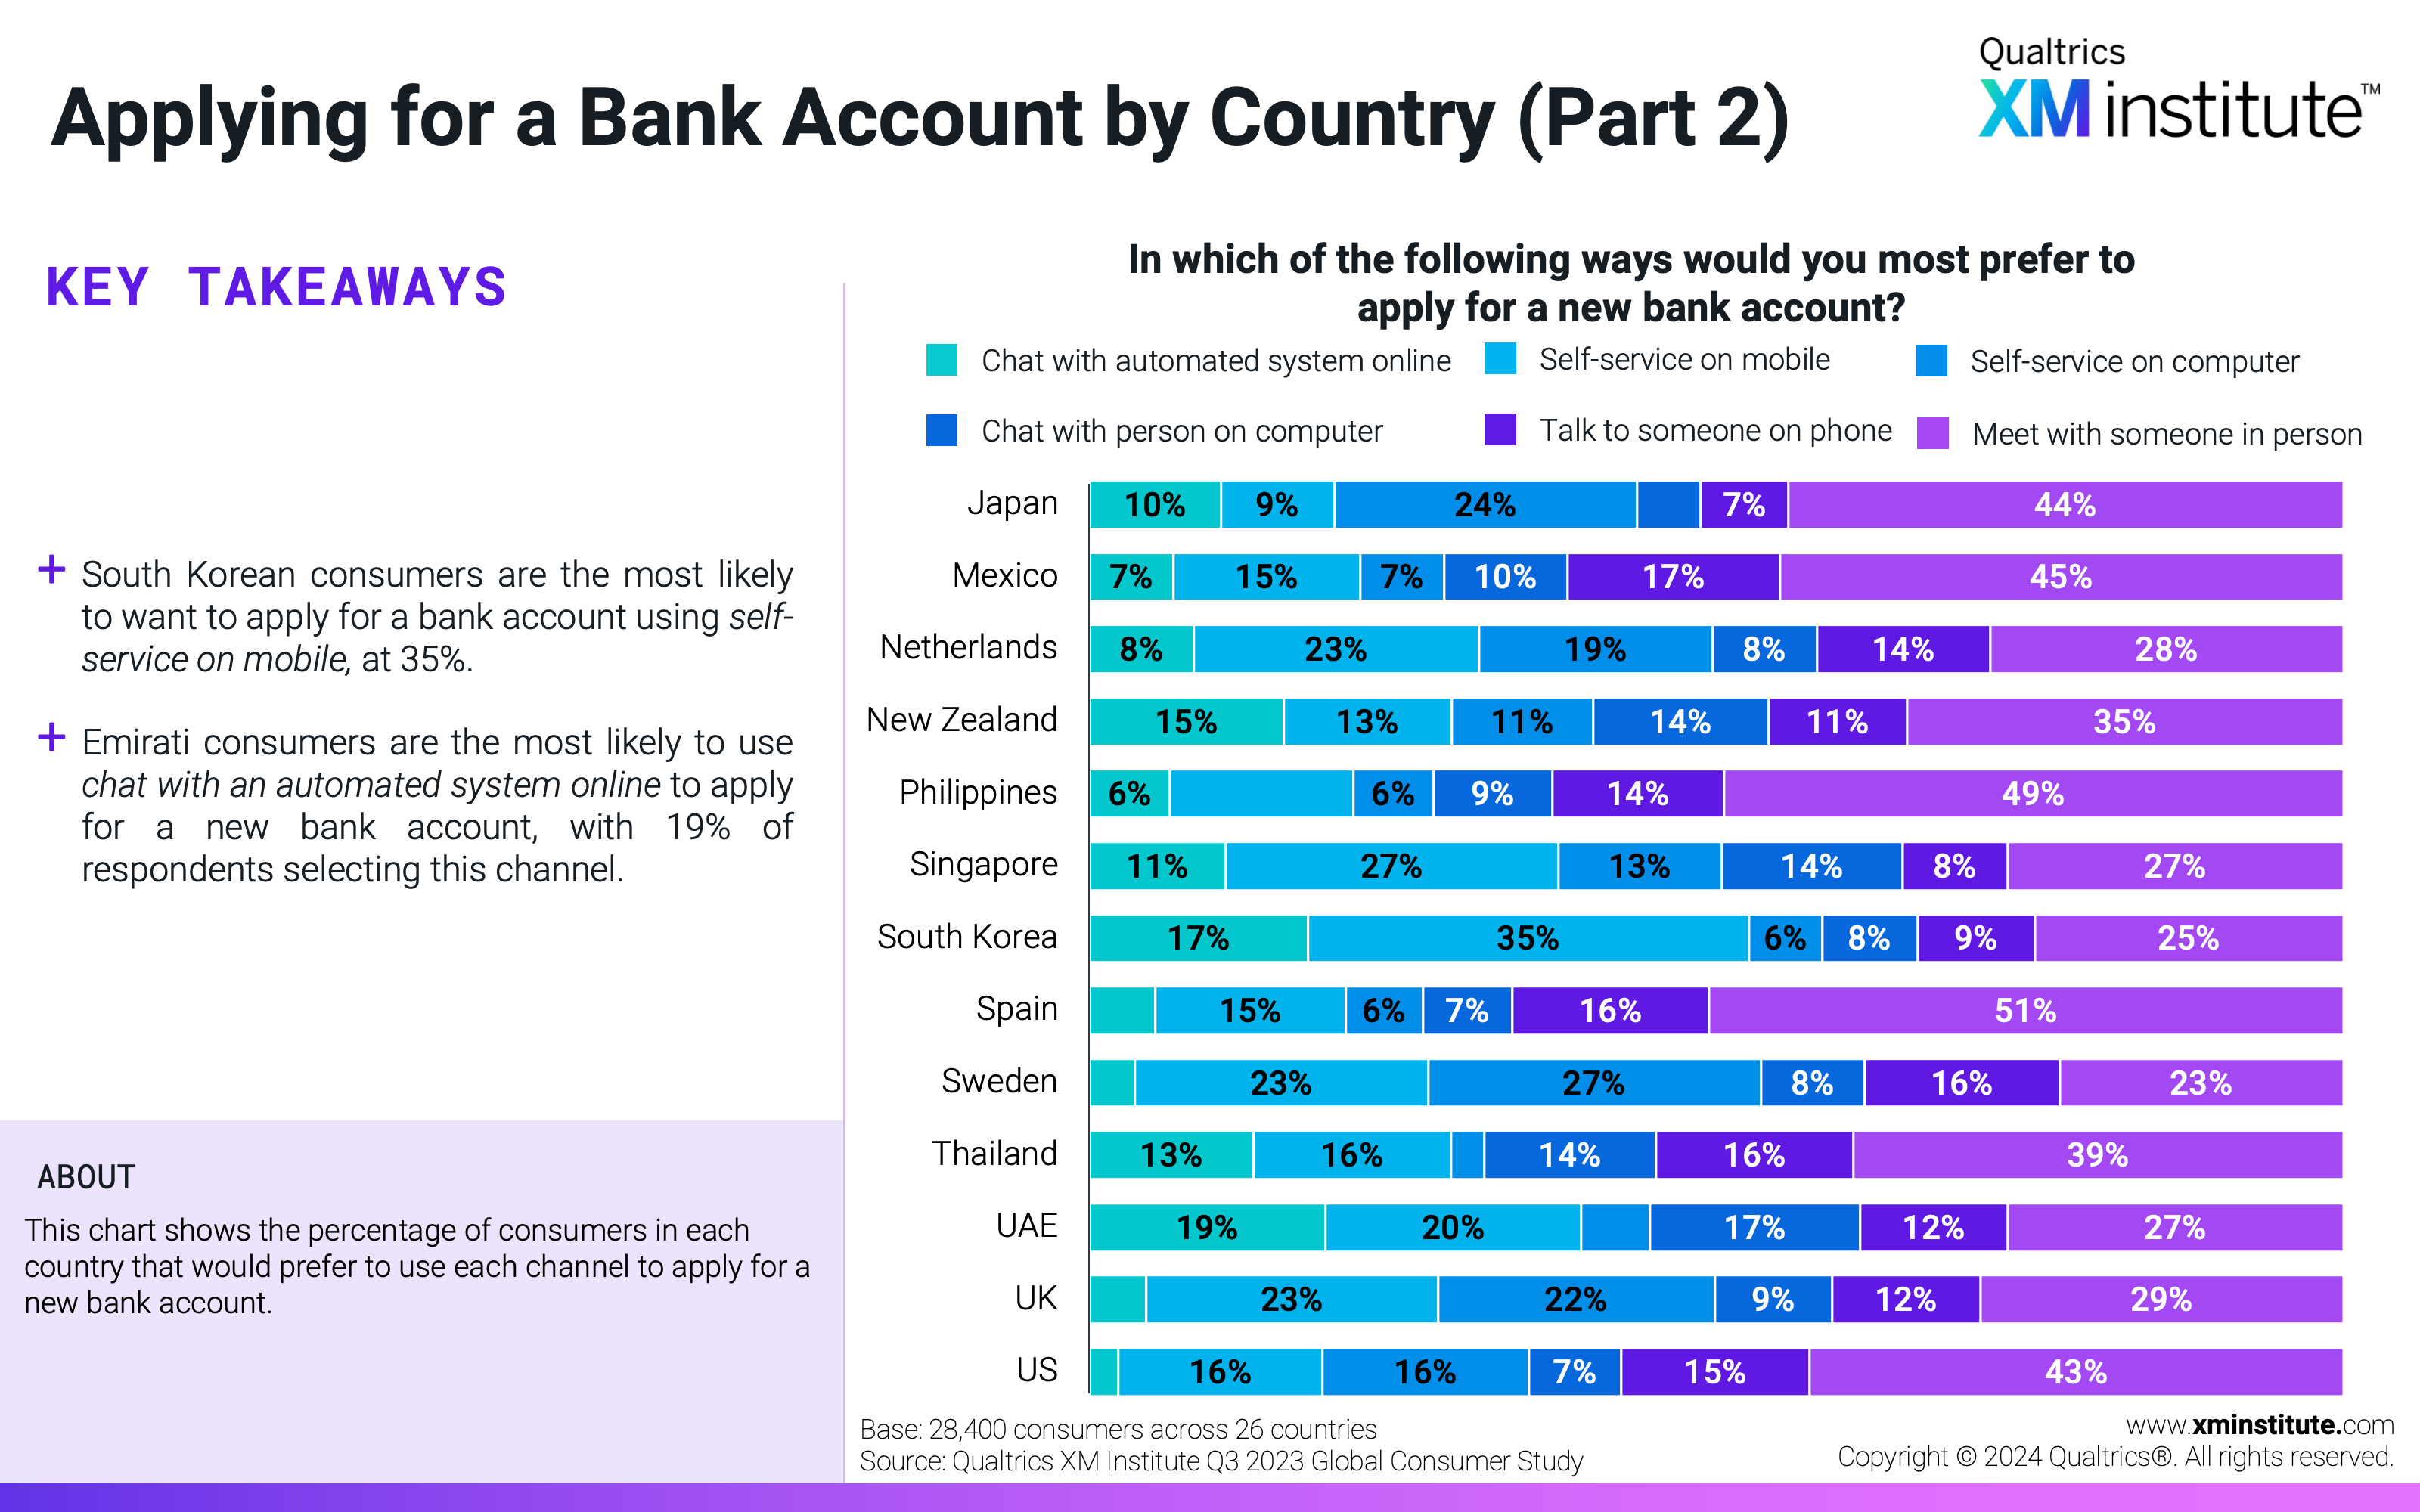 This chart shows the percentage of consumers in each country that would prefer to use each channel to apply for a new bank account. 